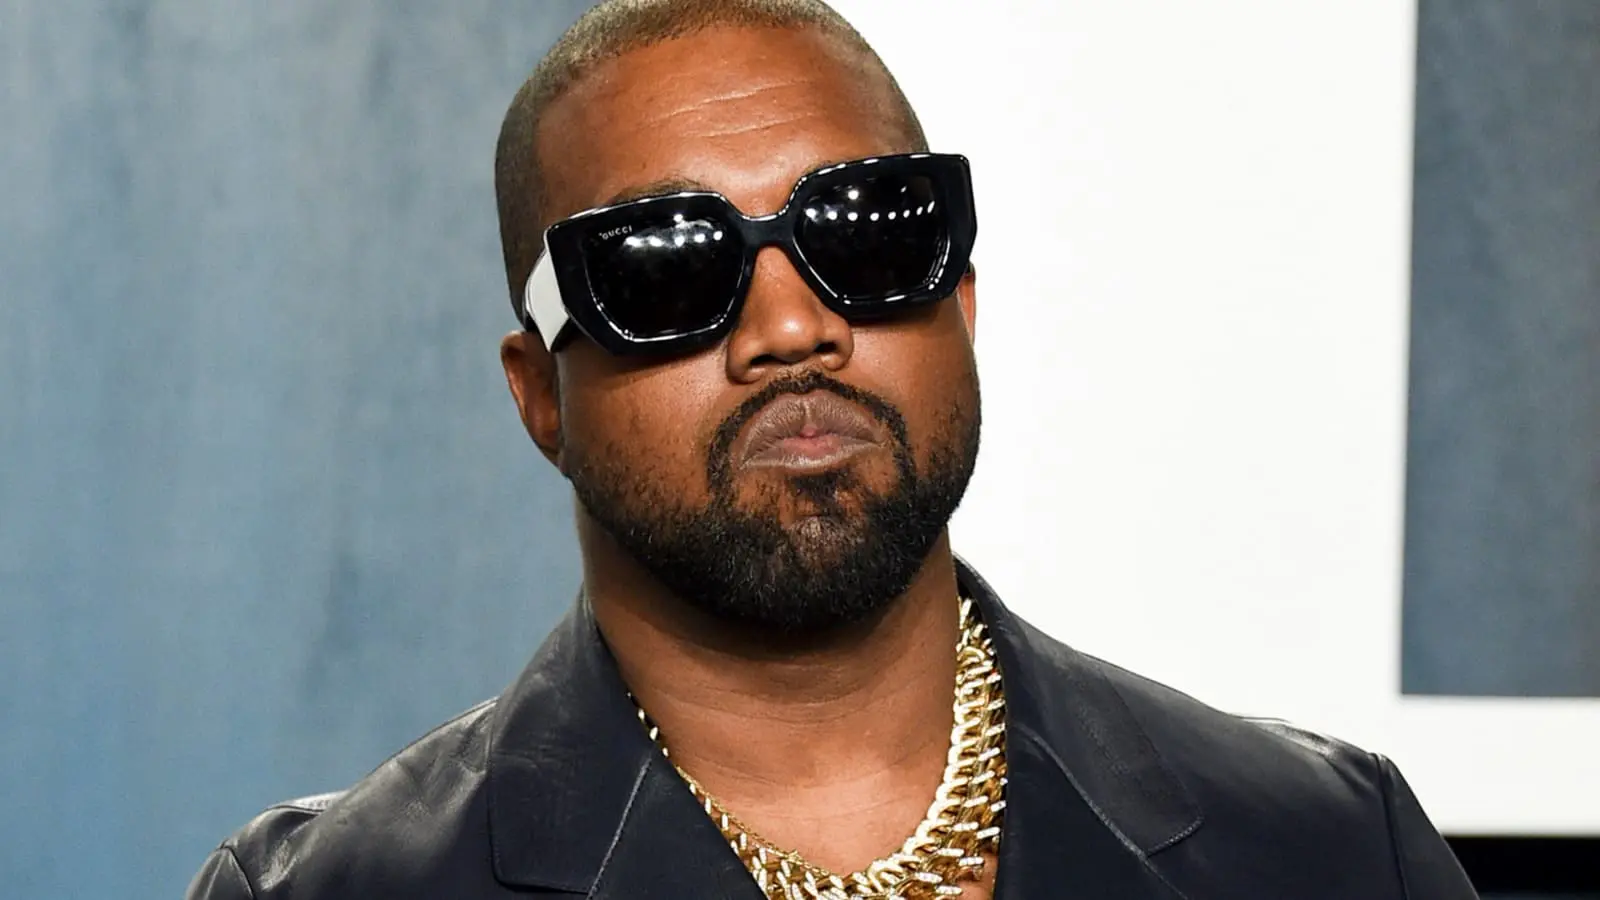 Kanye West recently announced his presidential campaign for 2024